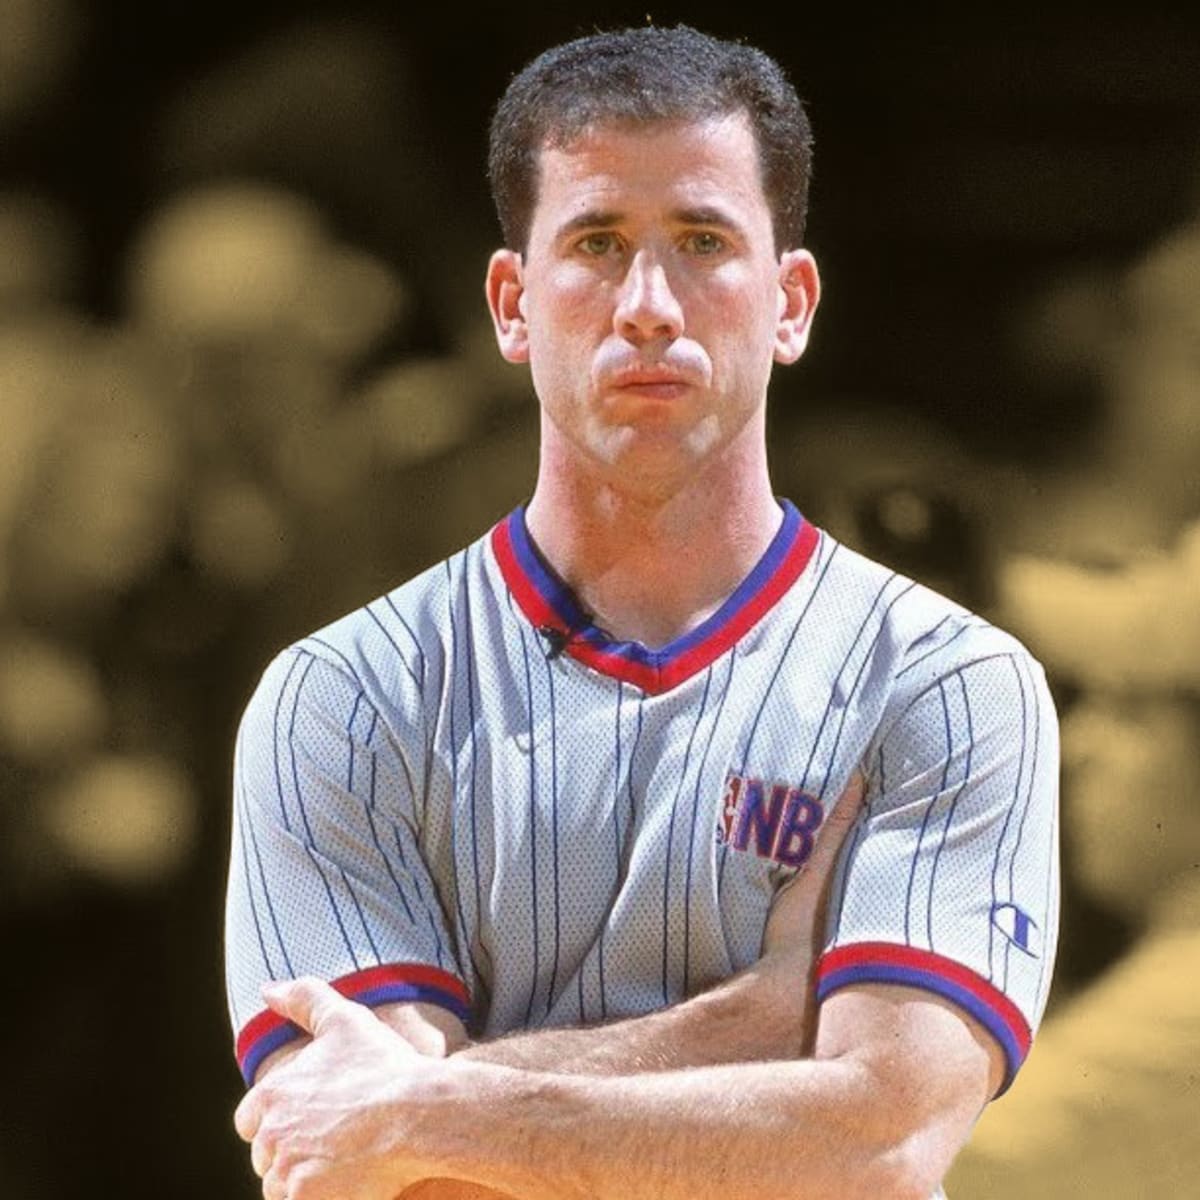 Netflix is planning to release a documentary featuring former NBA referee Tim Donaghy which might be bad news for the NBA - Basketball Network